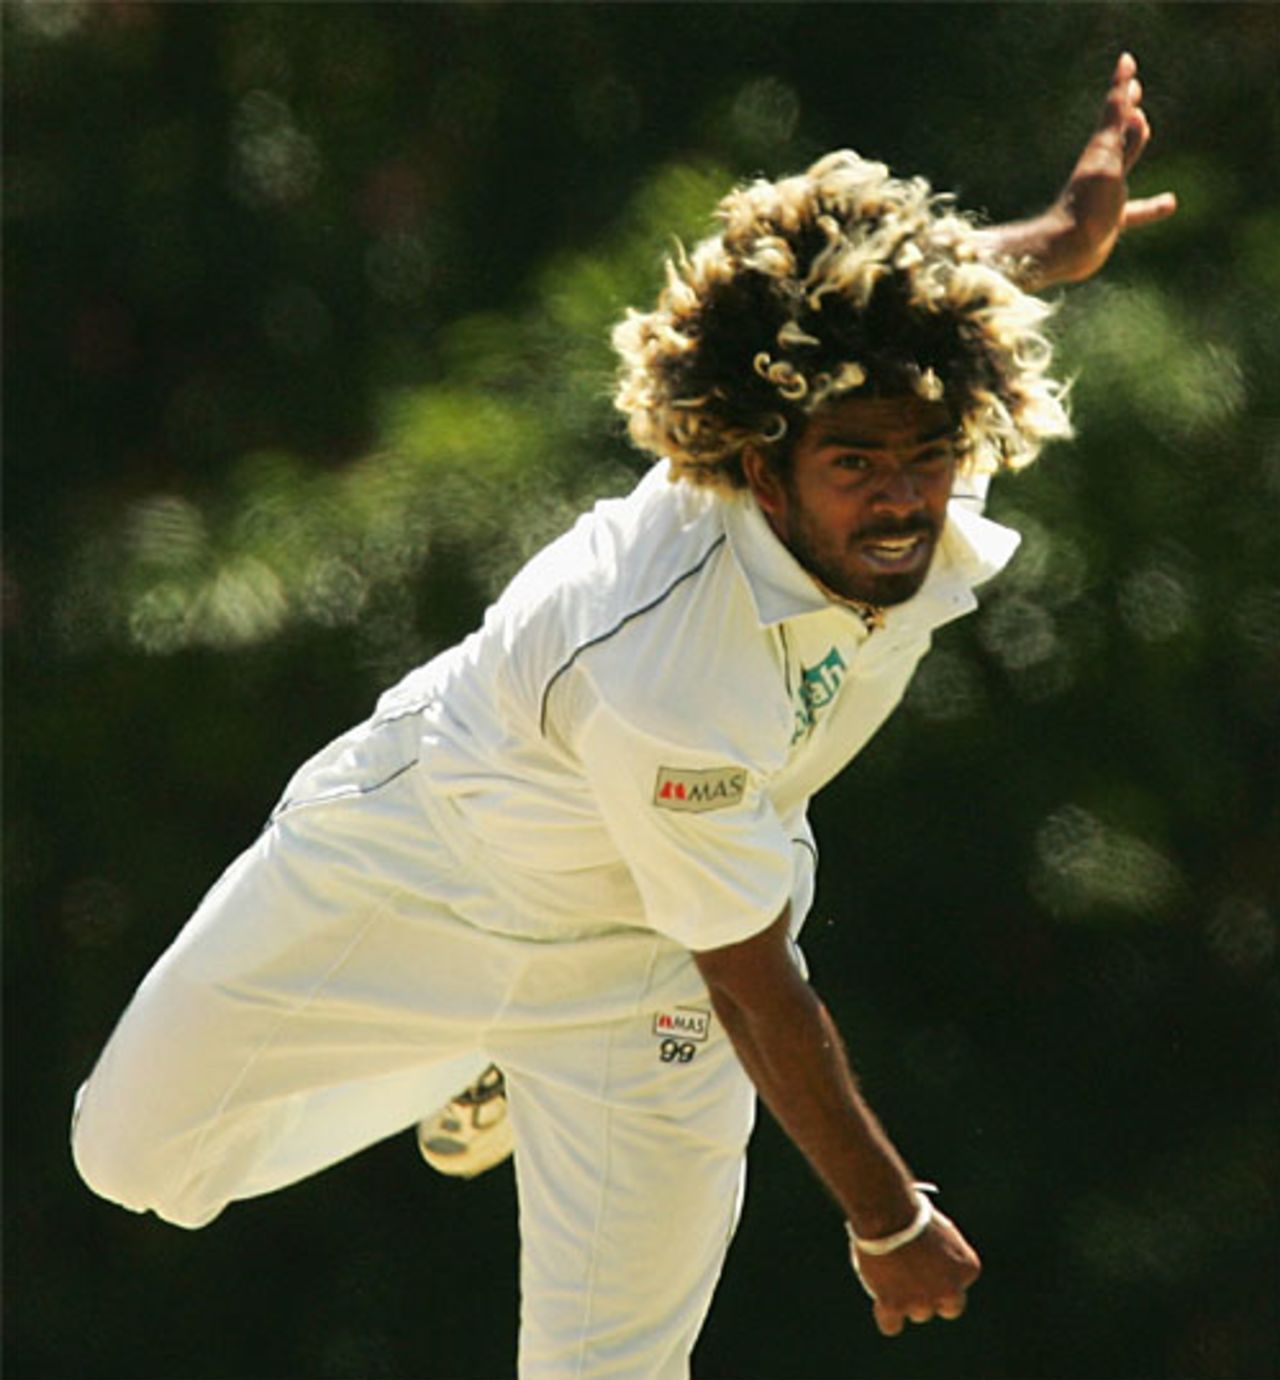 Lasith Malinga continued to get a good workout, Queensland v Sri Lankans, 2nd day, Brisbane, November 3, 2007